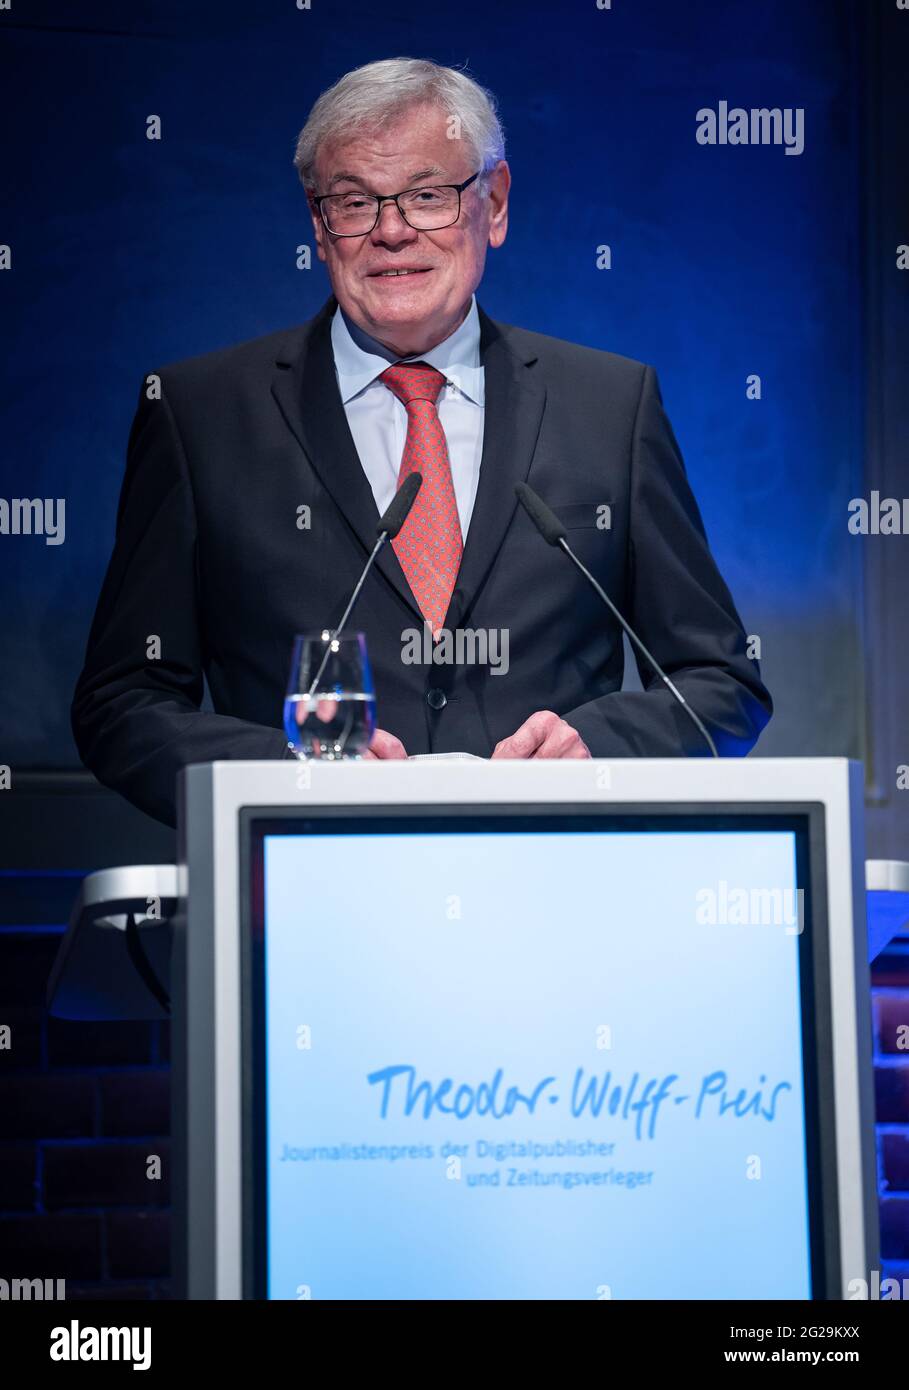 09 June 2021, Berlin: Helmut Heinen, Chairman of the Board of Trustees and publisher of the Kölnische Rundschau, speaks at the presentation of the Theodor Wolff Award. The prize of the German Association of Digital Publishers and Newspaper Publishers (BDZV) is the most prestigious award in the German newspaper industry. It commemorates the long-time editor-in-chief of the legendary 'Berliner Tageblatt', Theodor Wolff (1868-1943). This year, 484 journalists took part in the competition. The prize is endowed with a total of 30,000 euros. Photo: Bernd von Jutrczenka/dpa Stock Photo